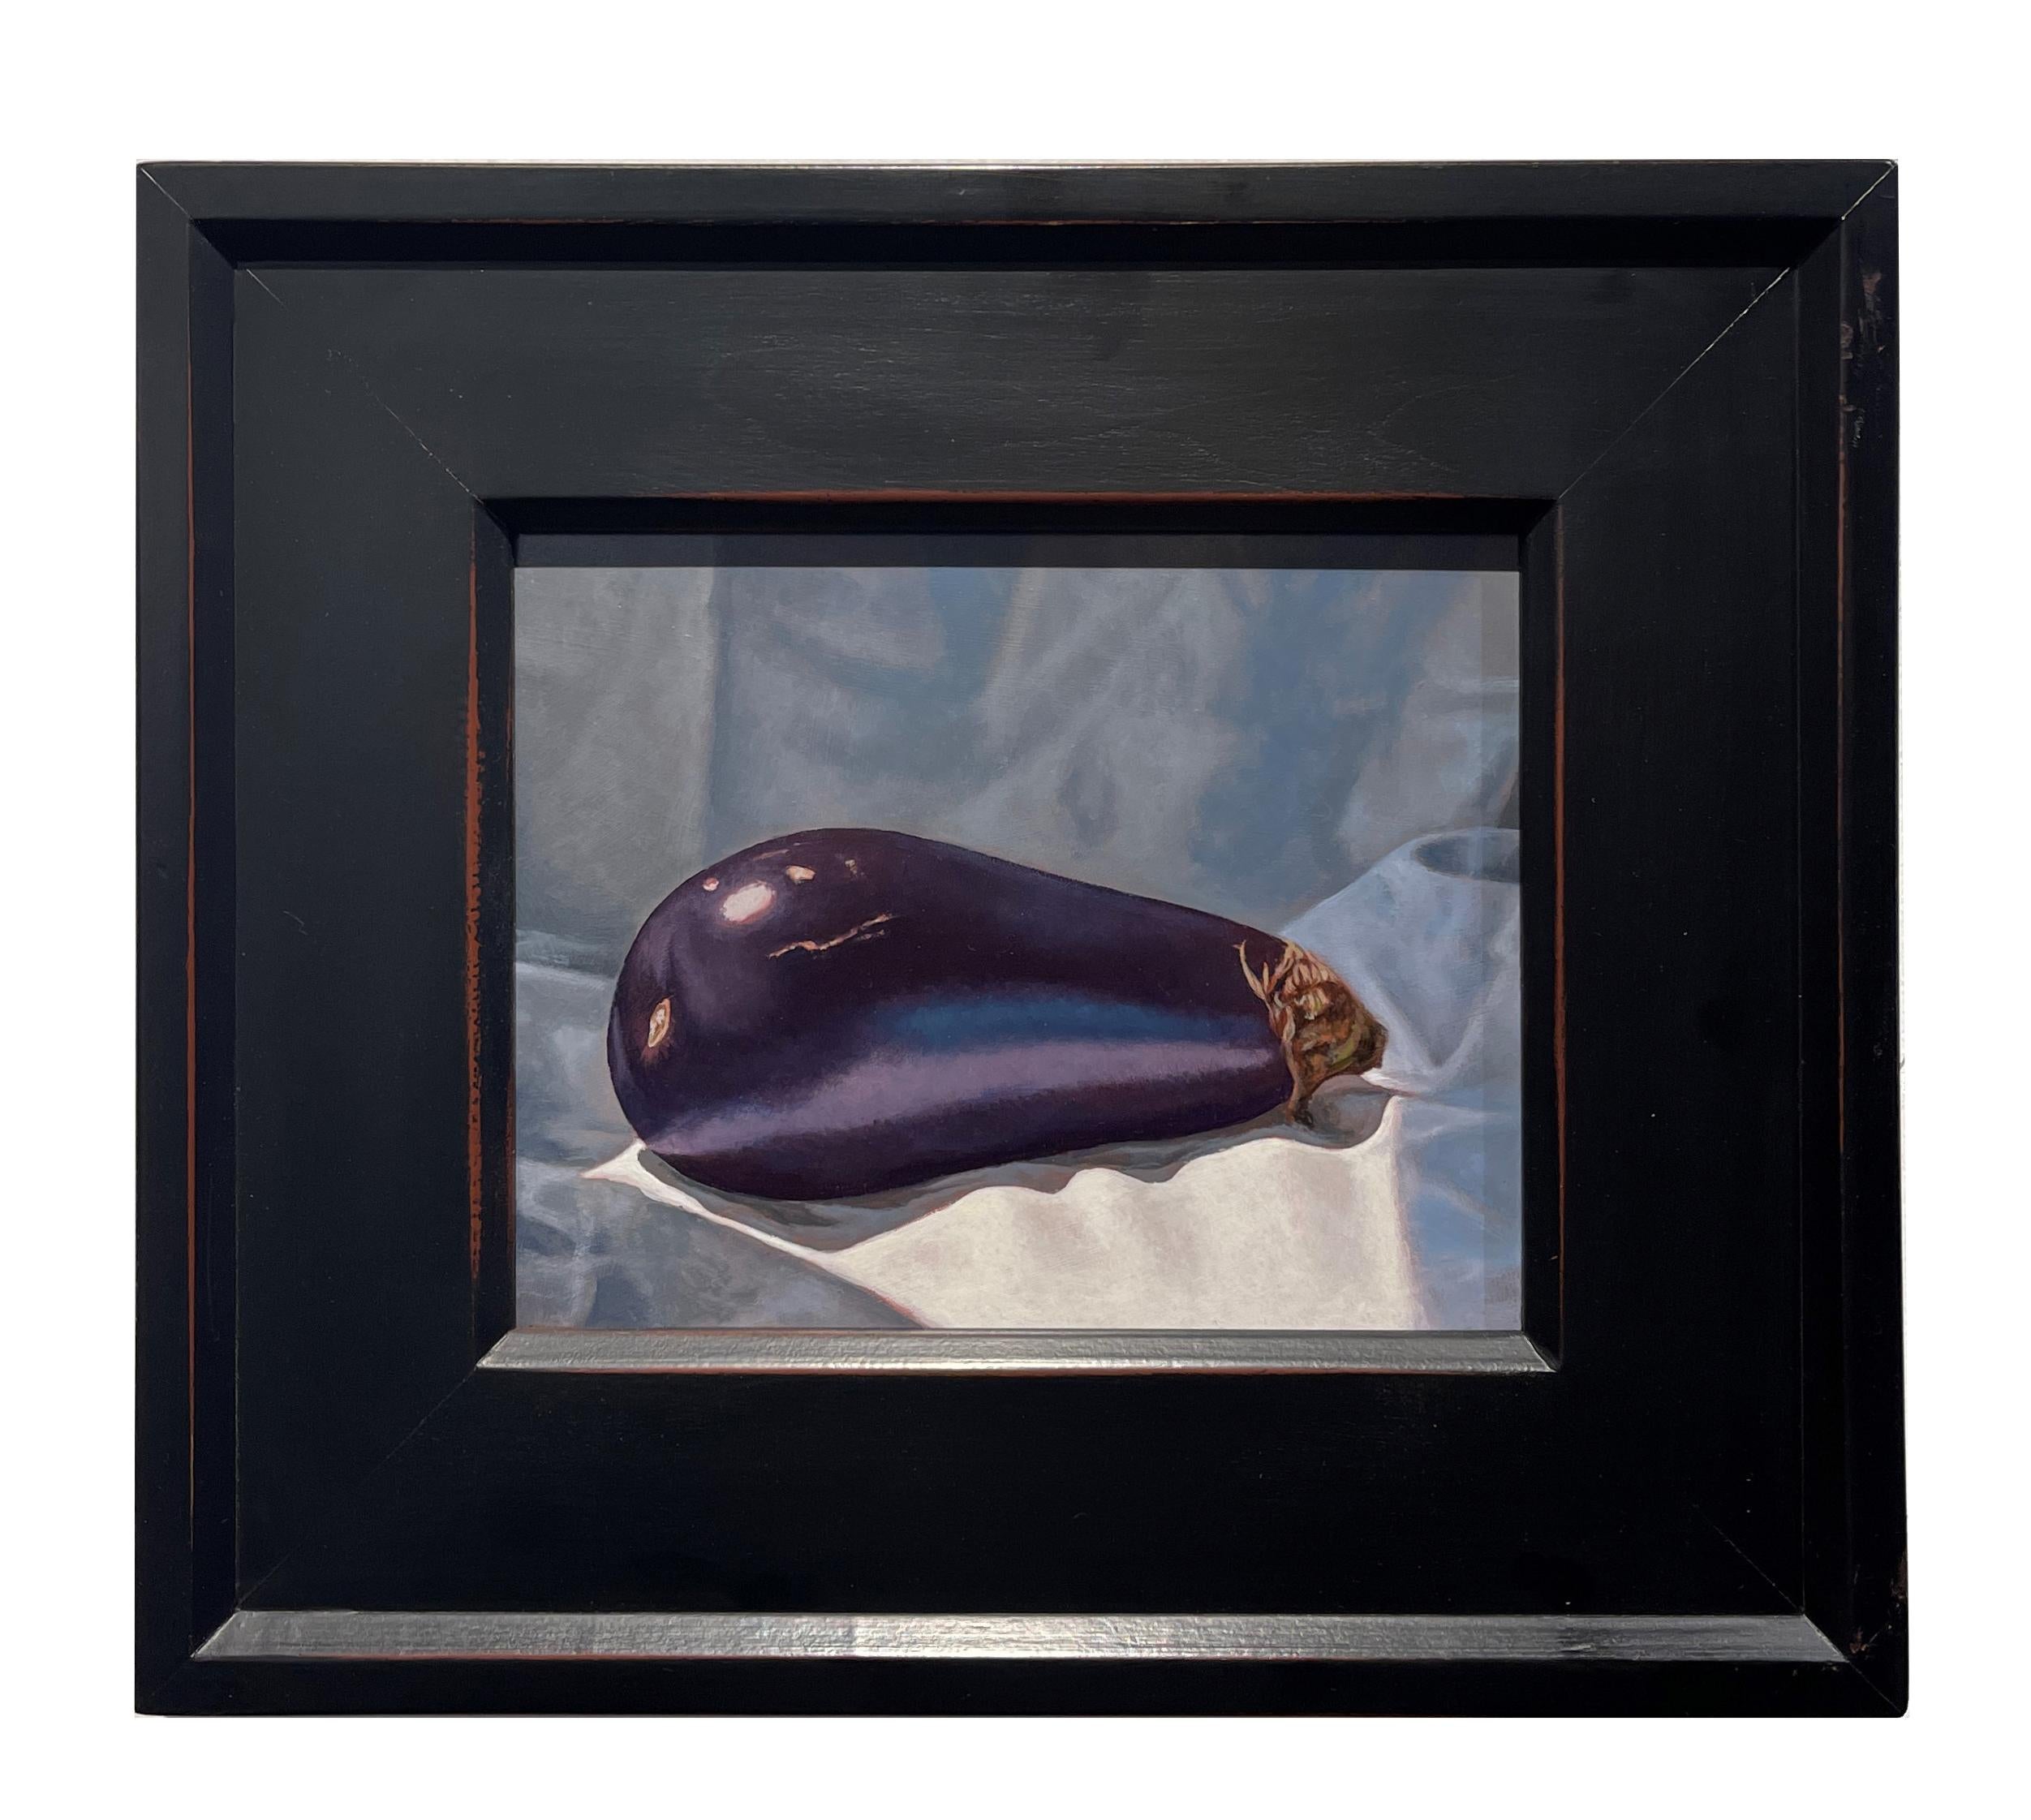 A simple eggplant sits upon a background of draped fabric yet its complexity draws us in to examine the exquisite detail, the softness of the fabric, the surface of the eggplant.  This still life is enhanced by the hand made wooden frame measuring